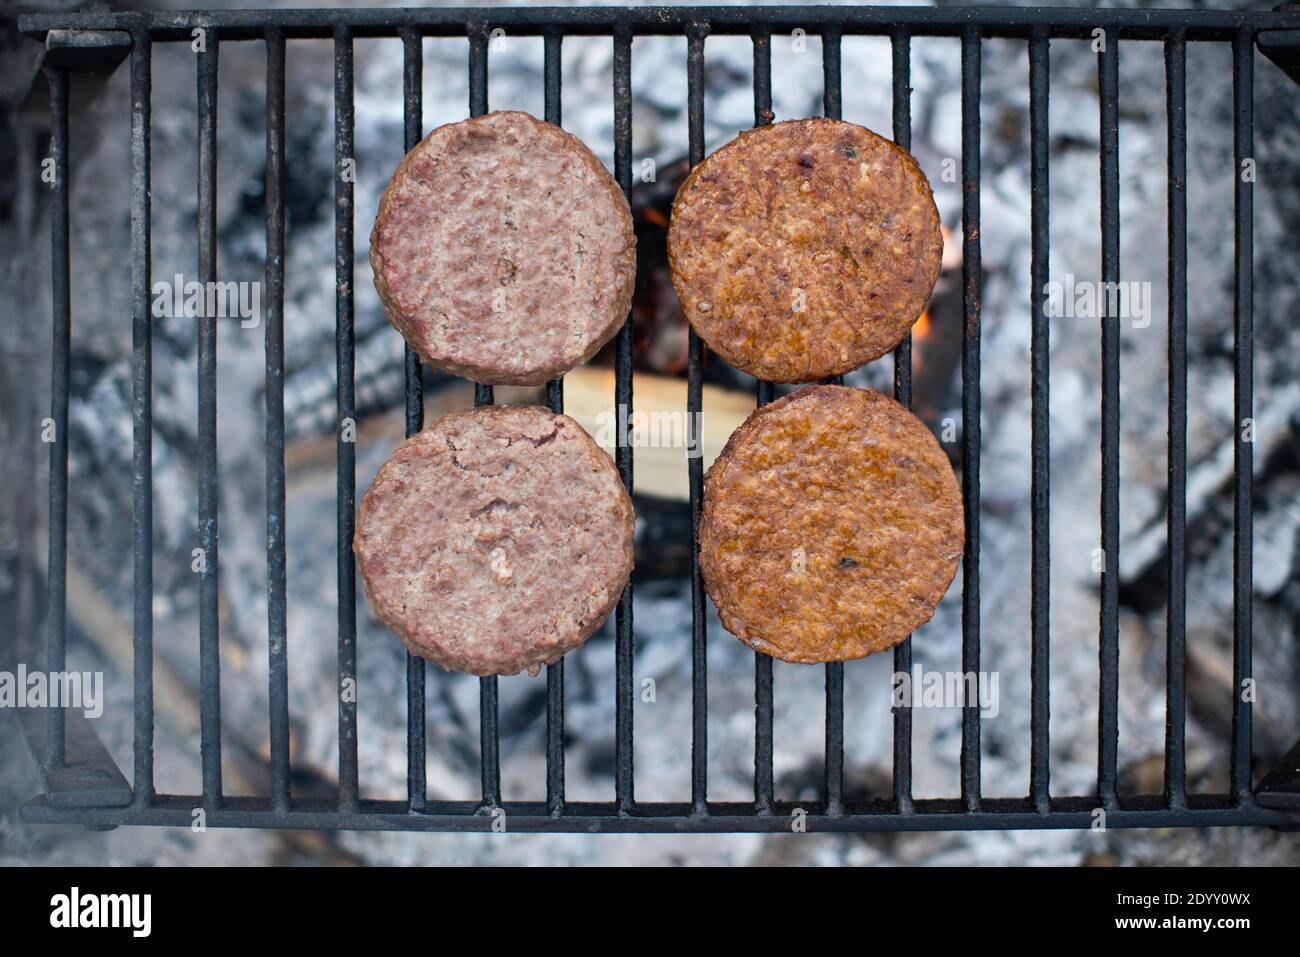 Meat beef burgers (L) and vegan plant based burgers (R) cook side by side on an open fire Stock Photo